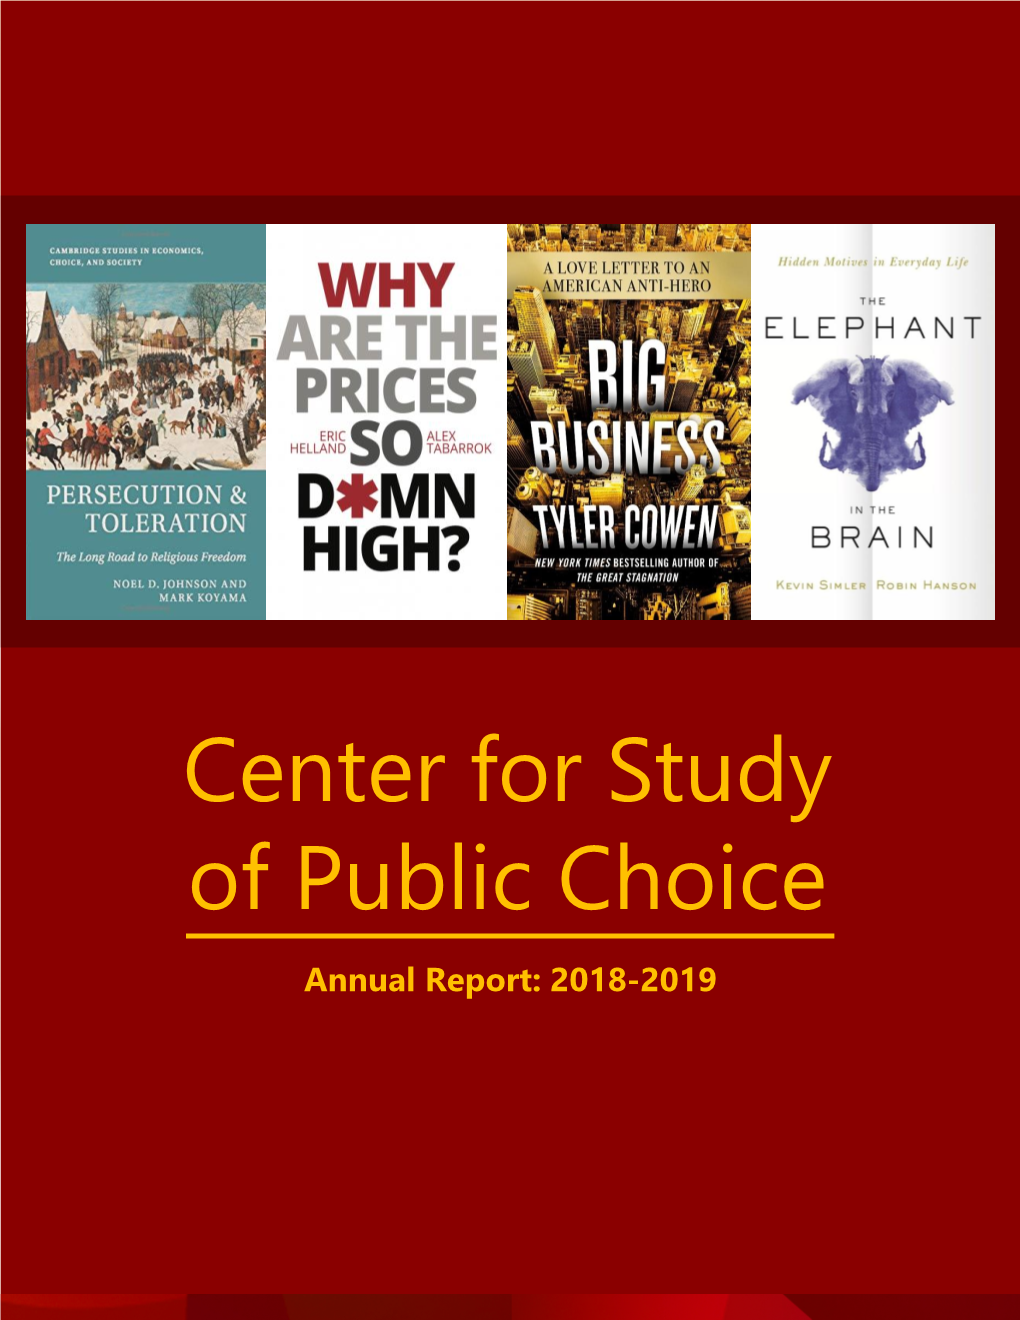 Center for Study of Public Choice